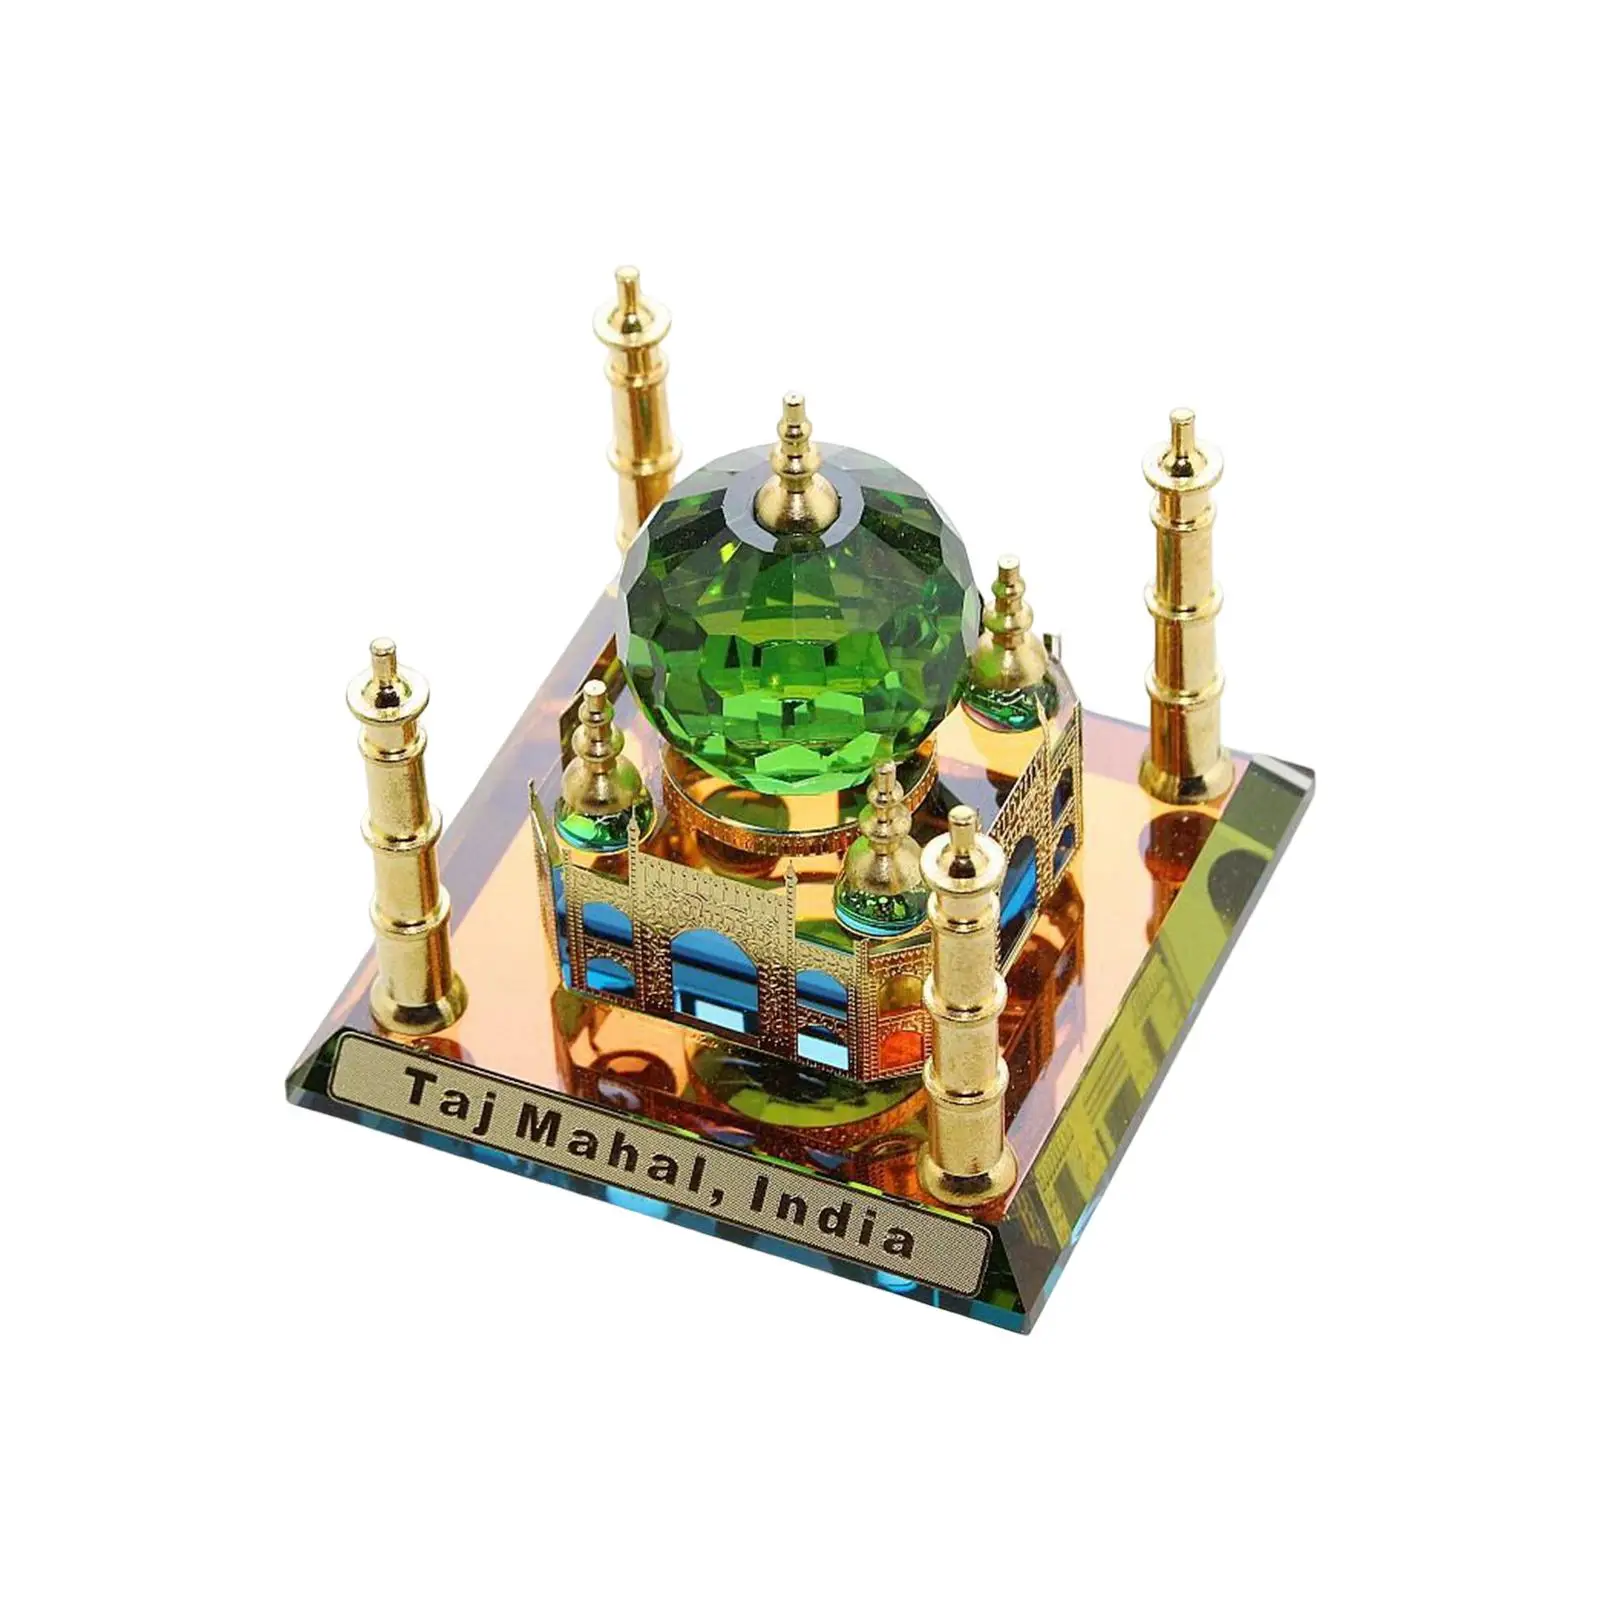 Mosque Model Table Artwork Mosque Miniature Model Islamic Showpiece Car Dashboard for Fireplace Office Decorations Home Holidays